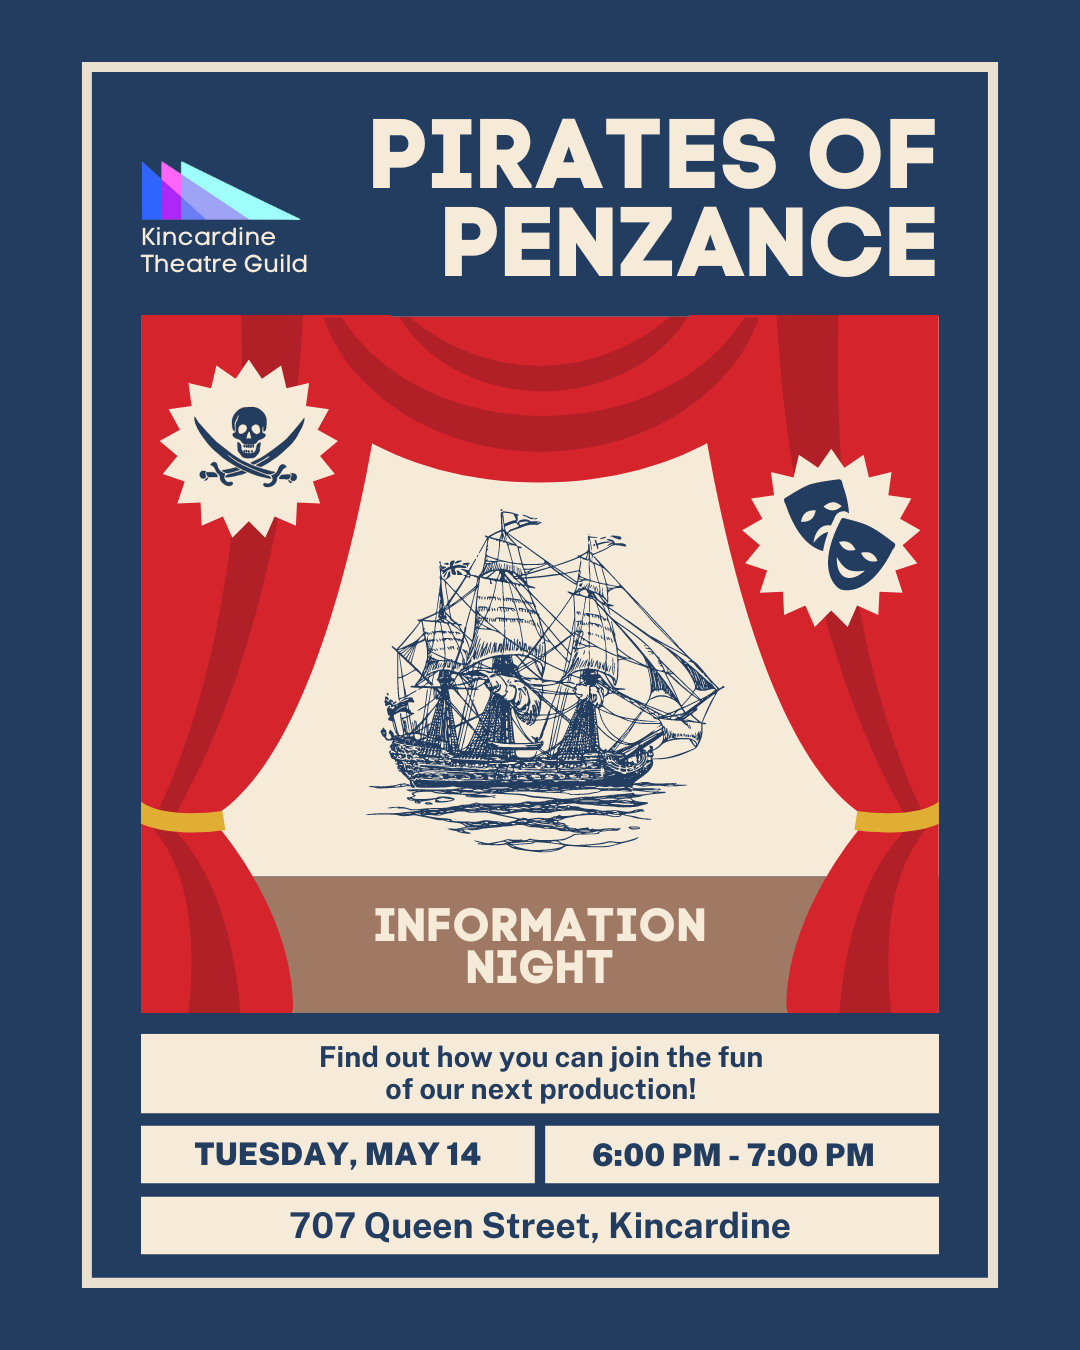 Come Learn about our Next Production – Pirates of Penzance (Tuesday, May 14)